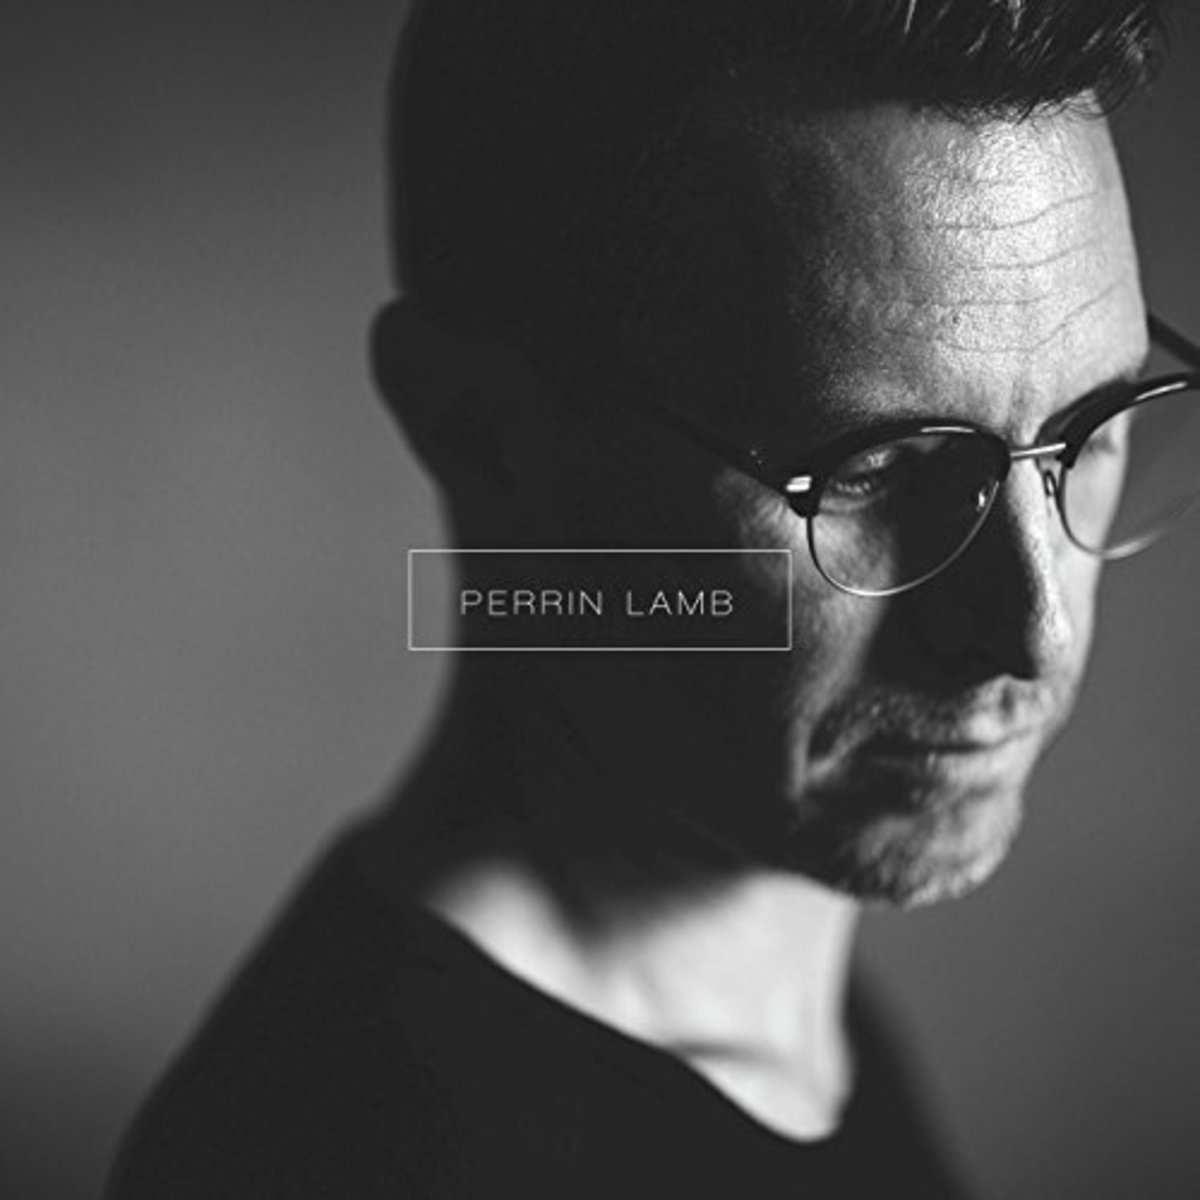 Perrin Lamb is an indie musician benefiting from Spotify because he owns his masters and publishing.